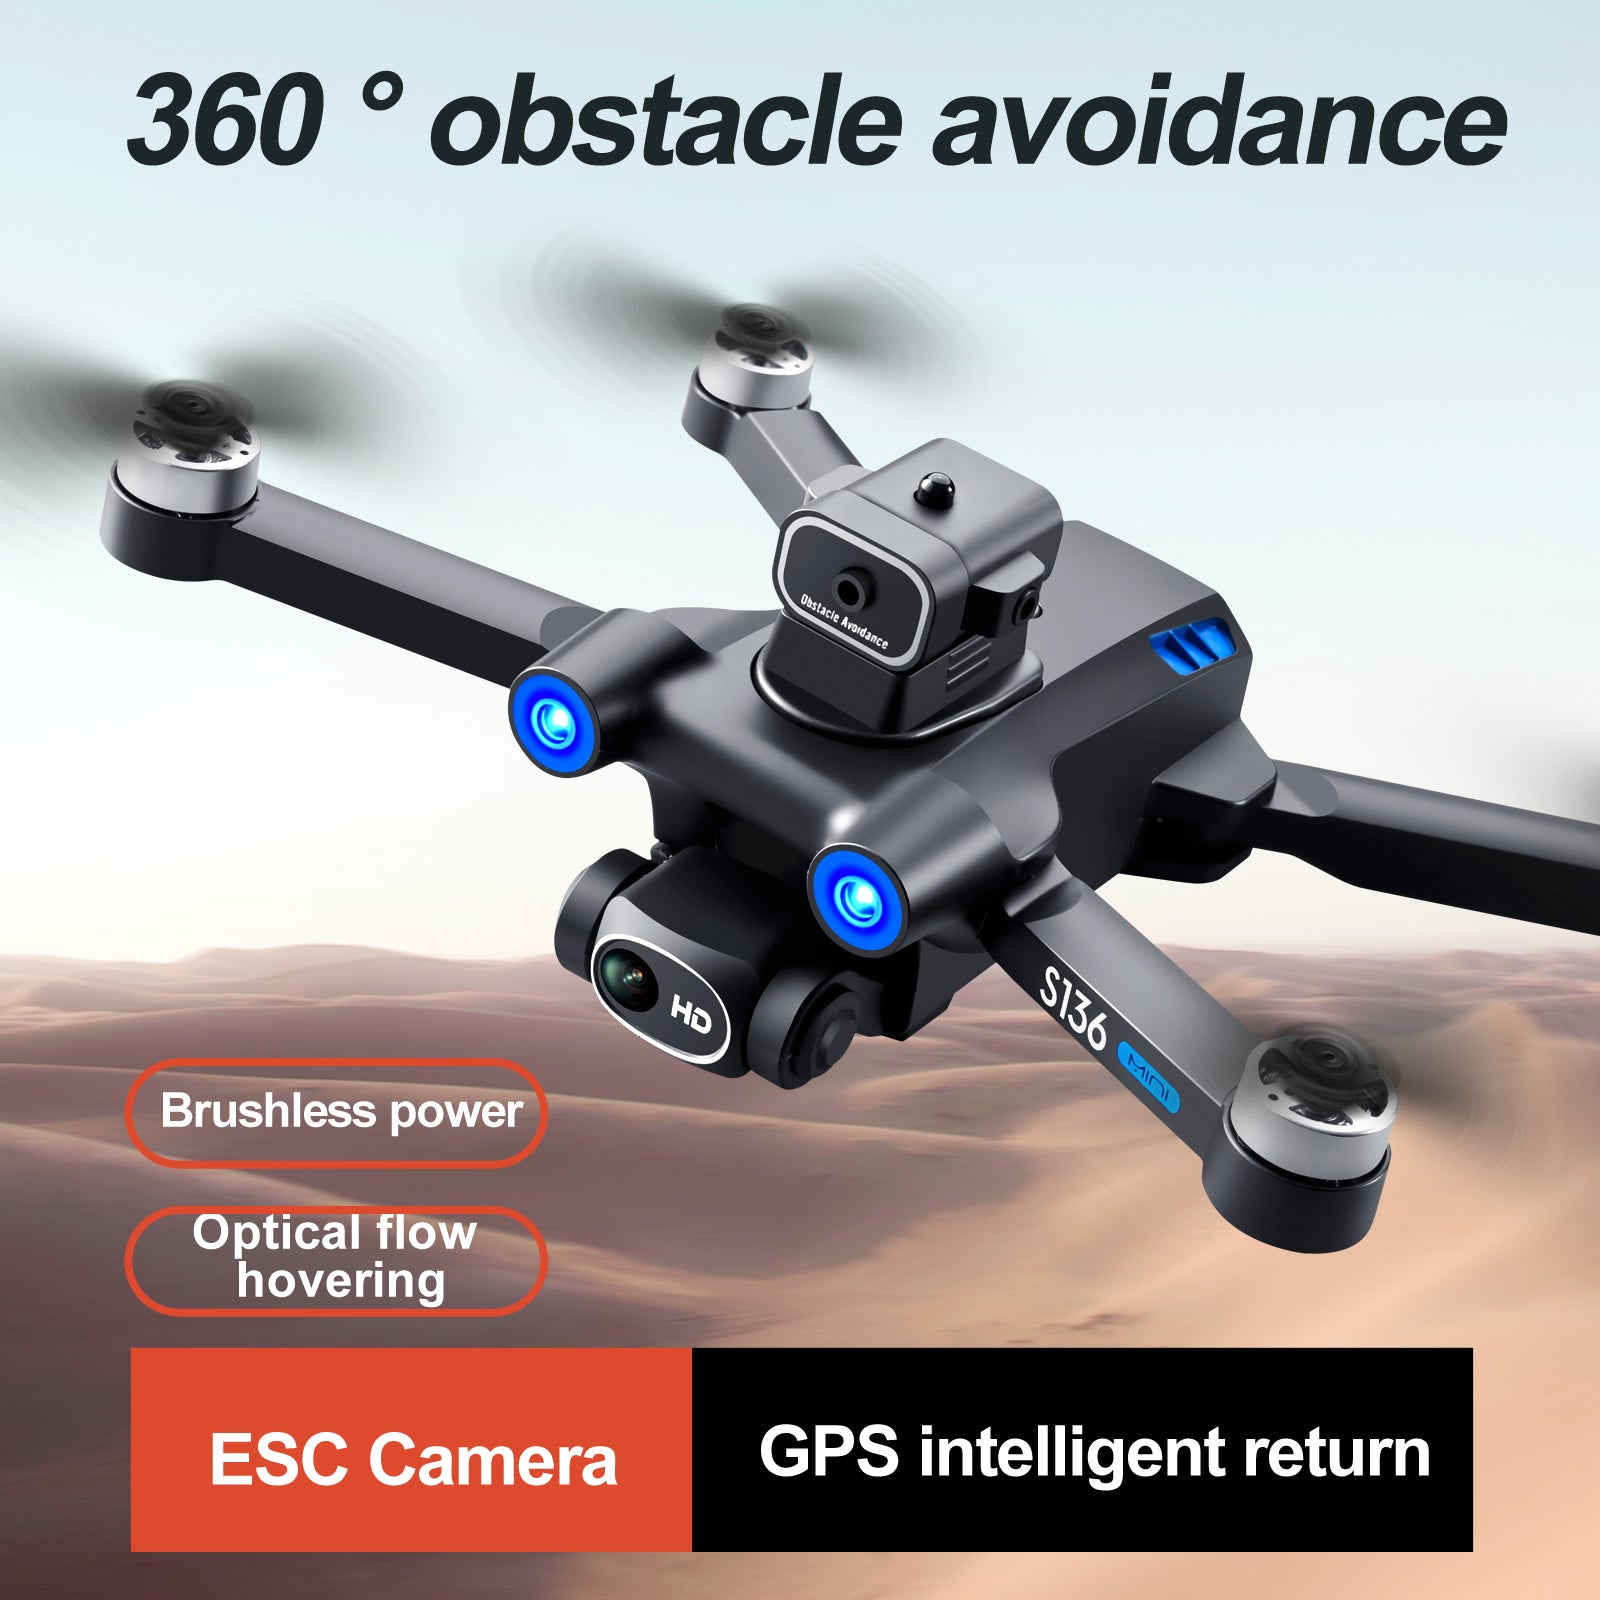 S136 High Quality Long Flight Time Powerful Drone With 4K Camera and GPS FPV Brushless RC Foldable Professional Drone Quadcopter | Electrr Inc